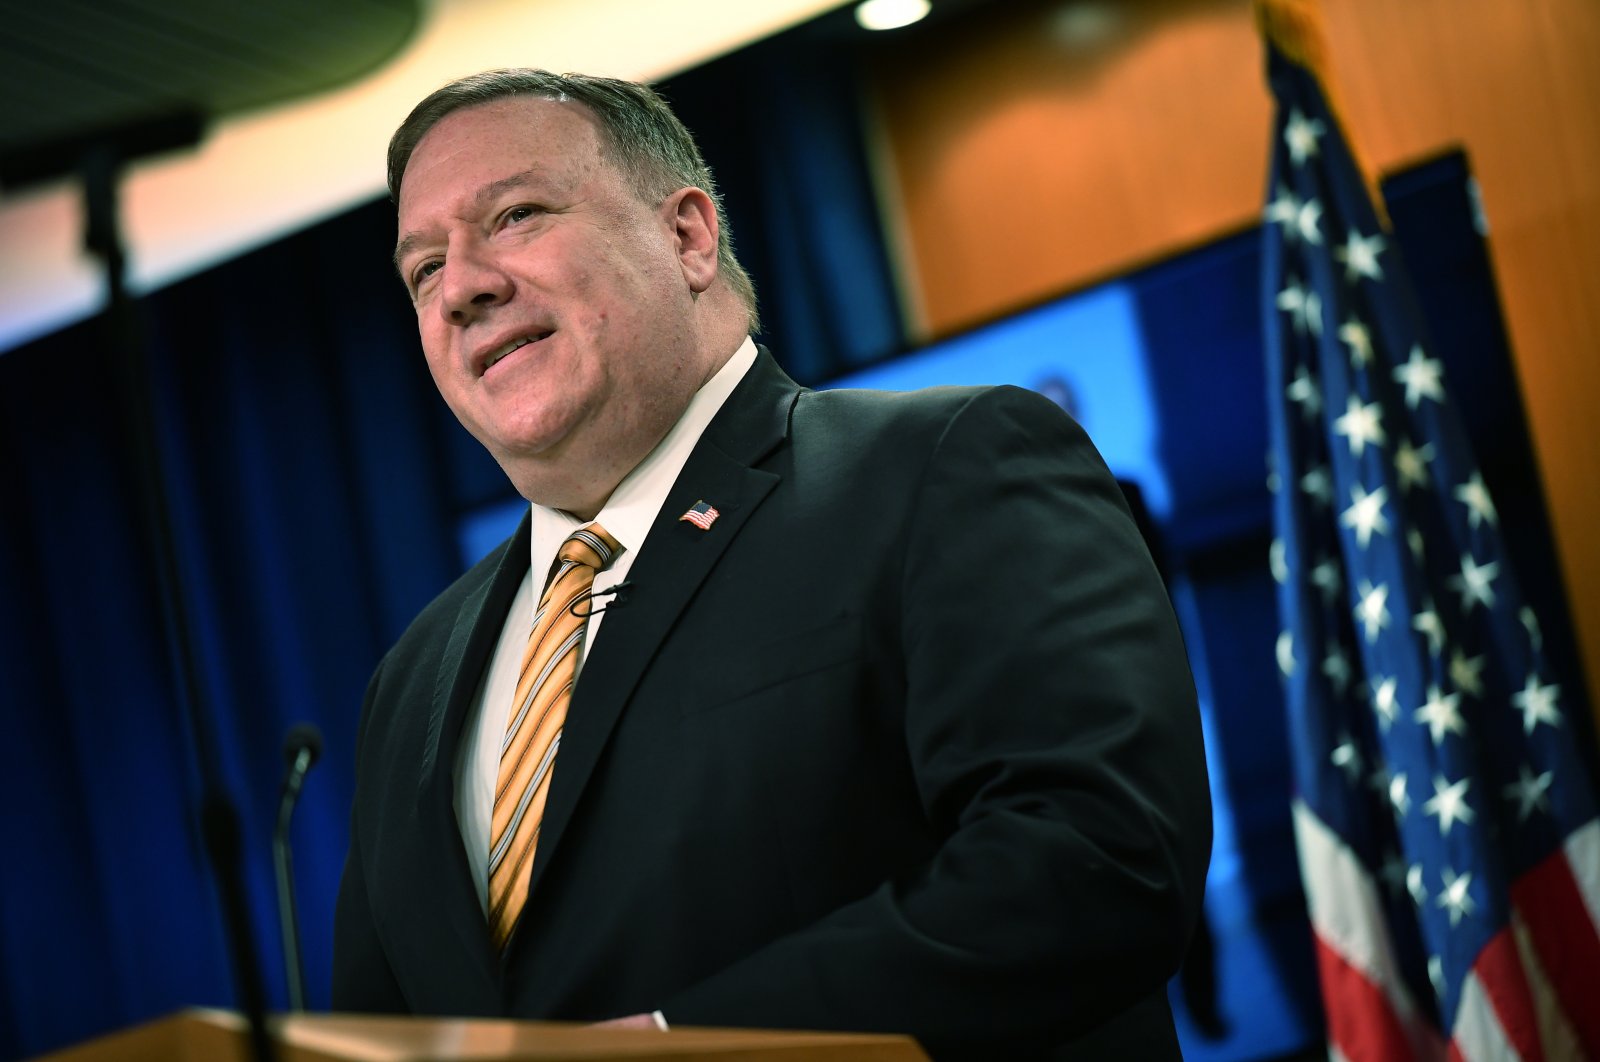 In this, June 24, 2020 file photo, US Secretary of State Mike Pompeo speaks during a news conference at the State Department in Washington. (Pool via AP)